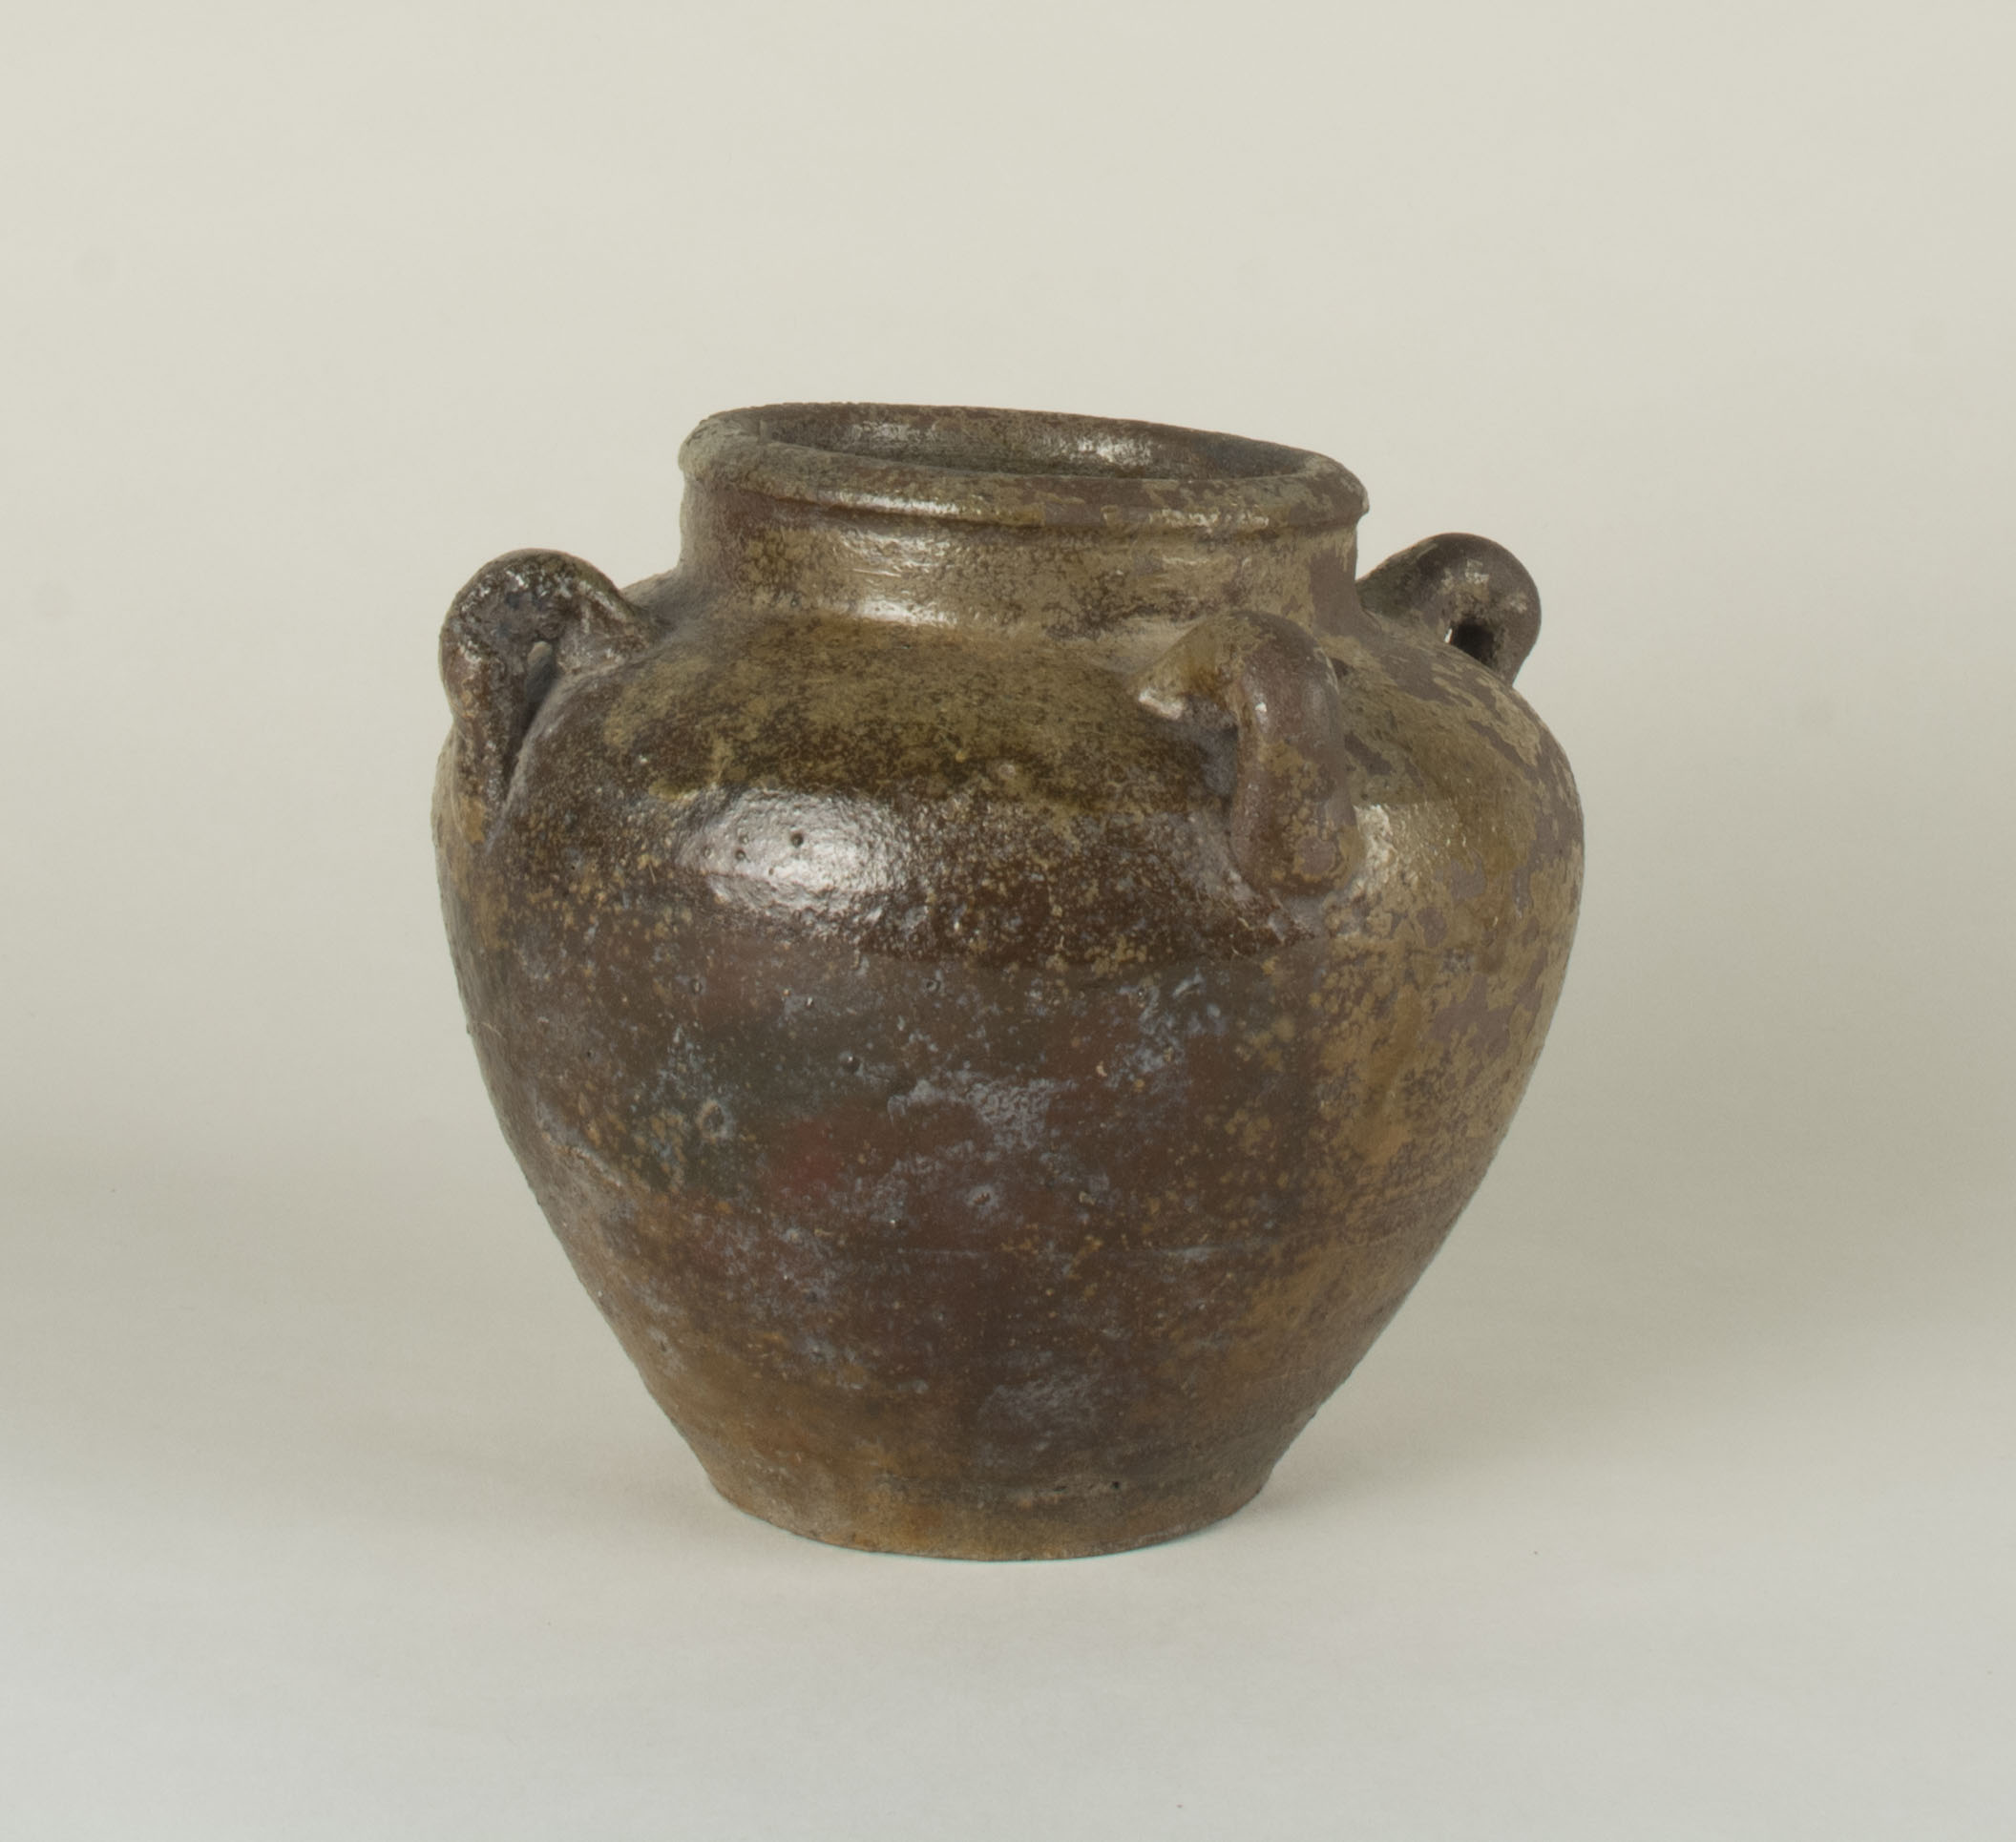 Caldera owned by Virginia Capulong.Clay pot. Family object from the Philippines. Although they do not use this one, caderas are often used and can be found in many homes. Acquisition date unknown. Any views, findings, conclusions, or recommendations expressed in this story do not necessarily represent those of the National Endowment for the Humanities. 